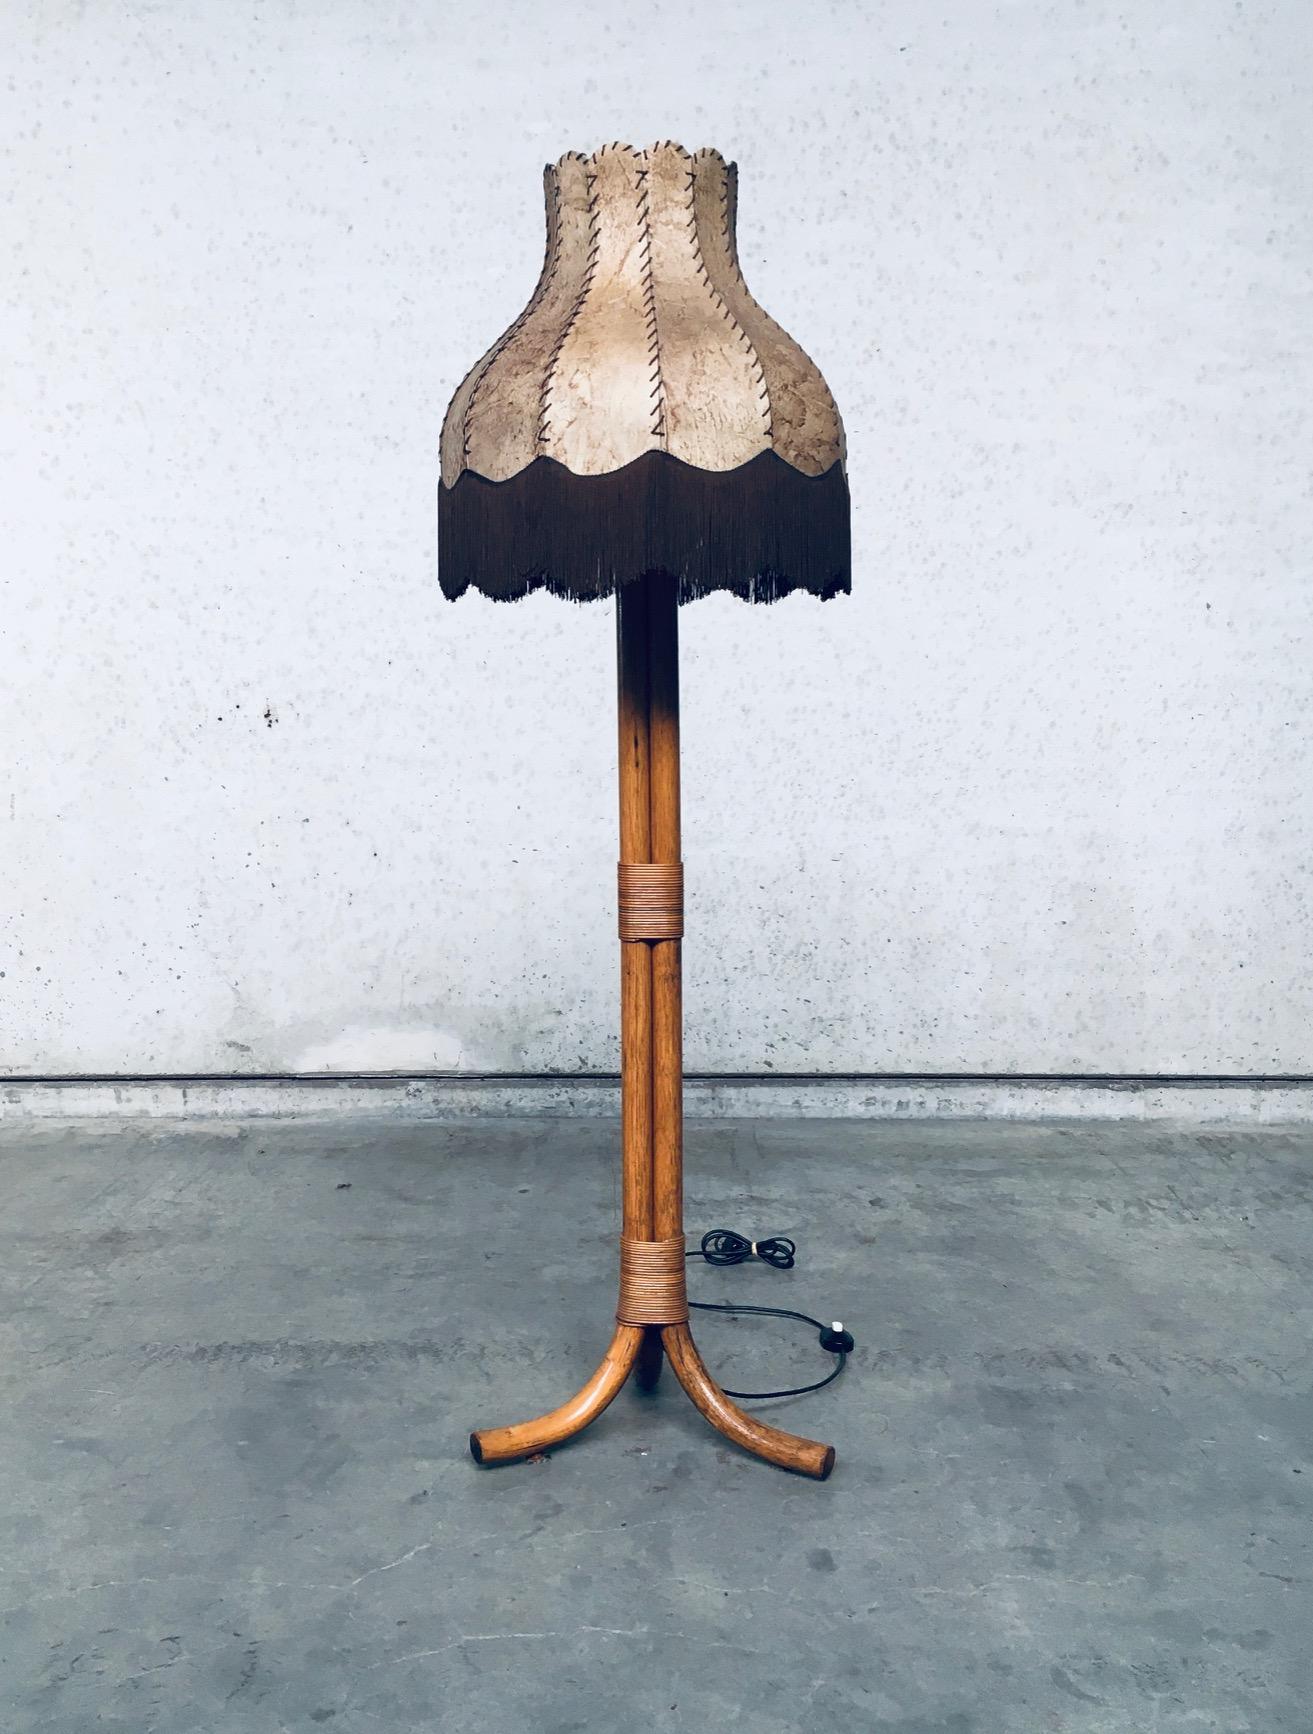 Vintage midcentury design bamboo floor lamp with leather lampshade, made in Italy 1970's. 3 Bamboo bound foot with leather stretched with fringe lampshade. In very good, original condition. Measures in total 50cm x 170cm x 50cm.